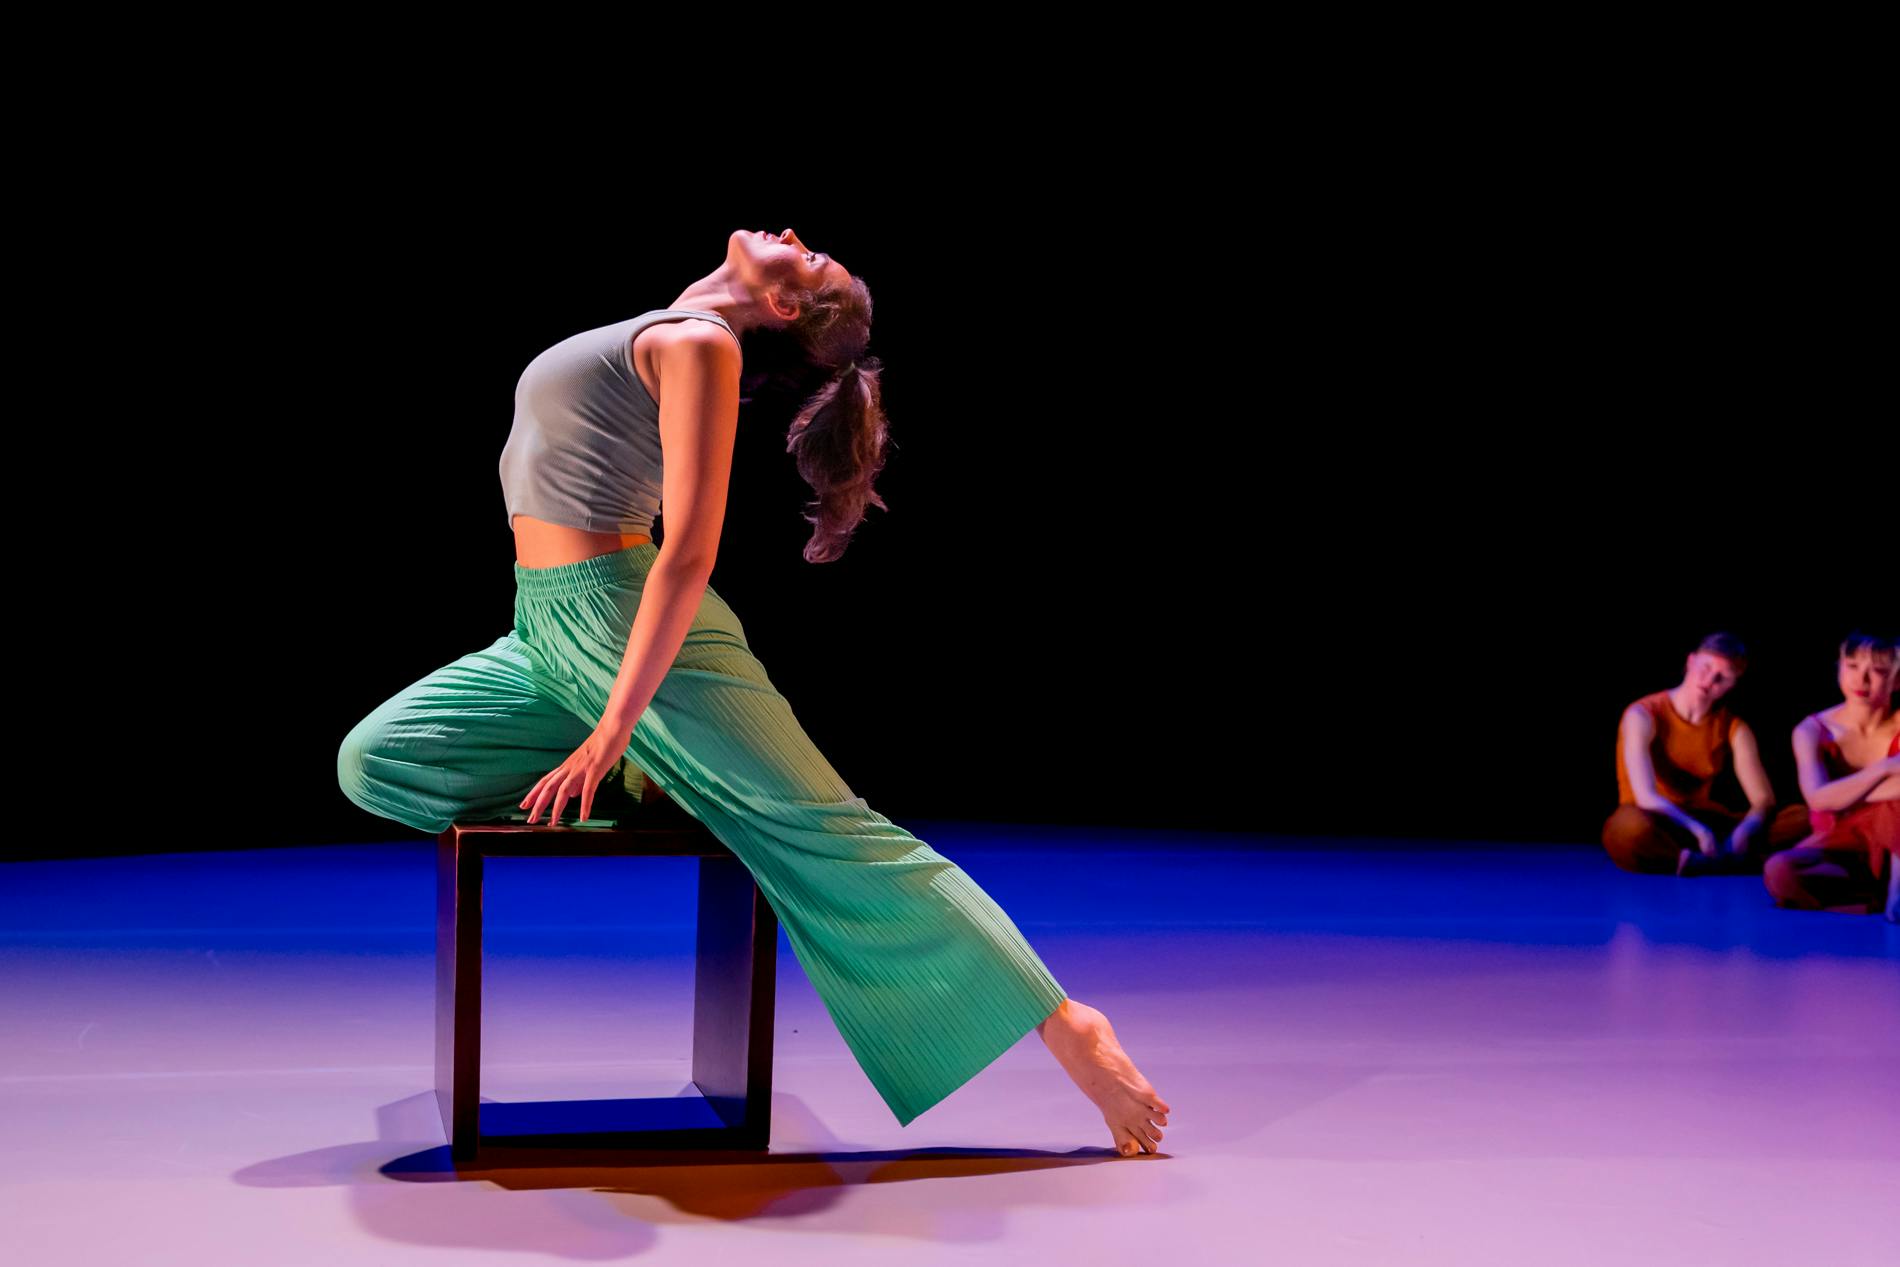 Alex, a dancer in all green, perches on a box and arches her back to look upward while other dancers look on.